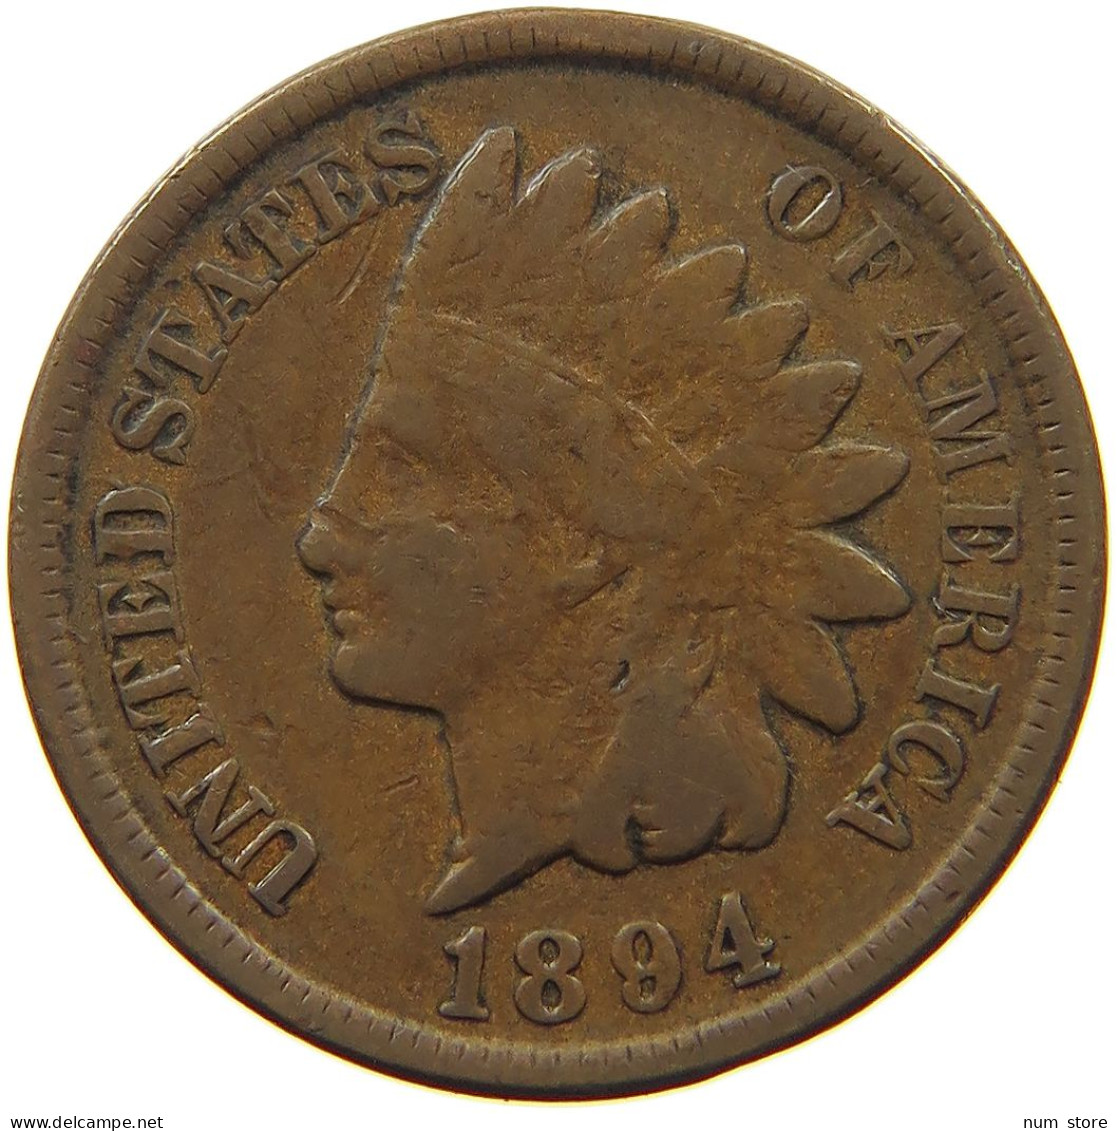 UNITED STATES OF AMERICA CENT 1894 INDIAN HEAD #c082 0263 - 1859-1909: Indian Head